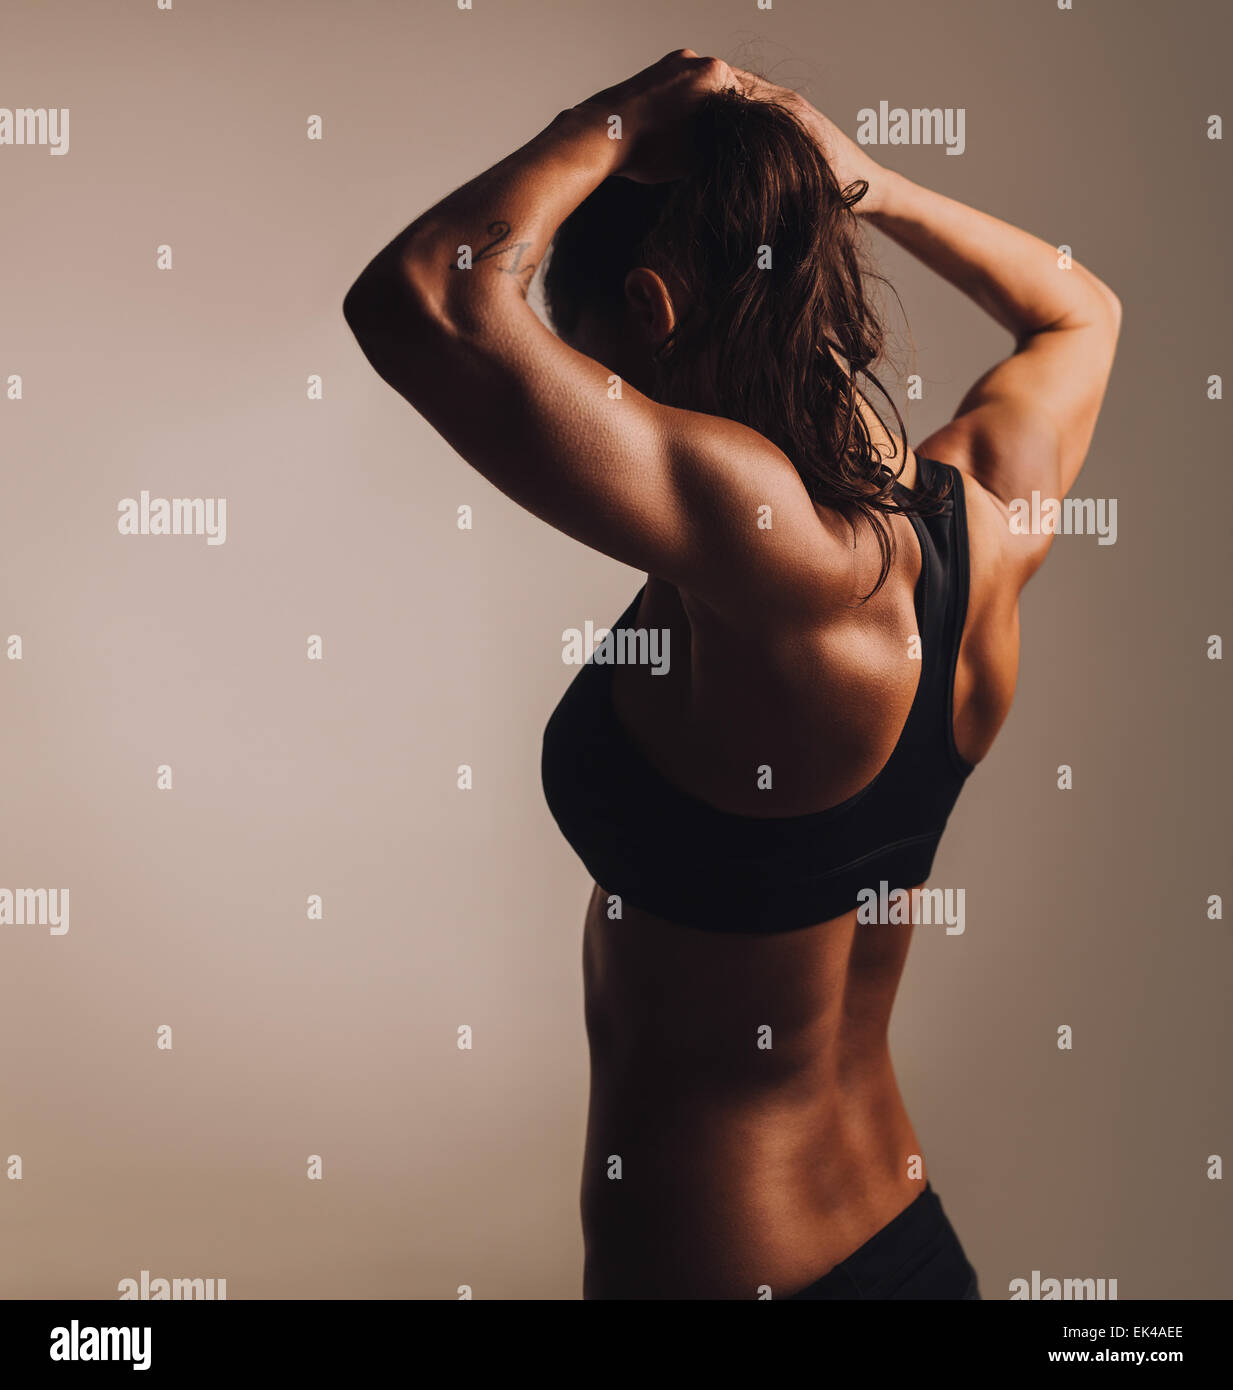 Rear view of young woman bodybuilder showing muscular body. Fitness female showing muscular back. Stock Photo